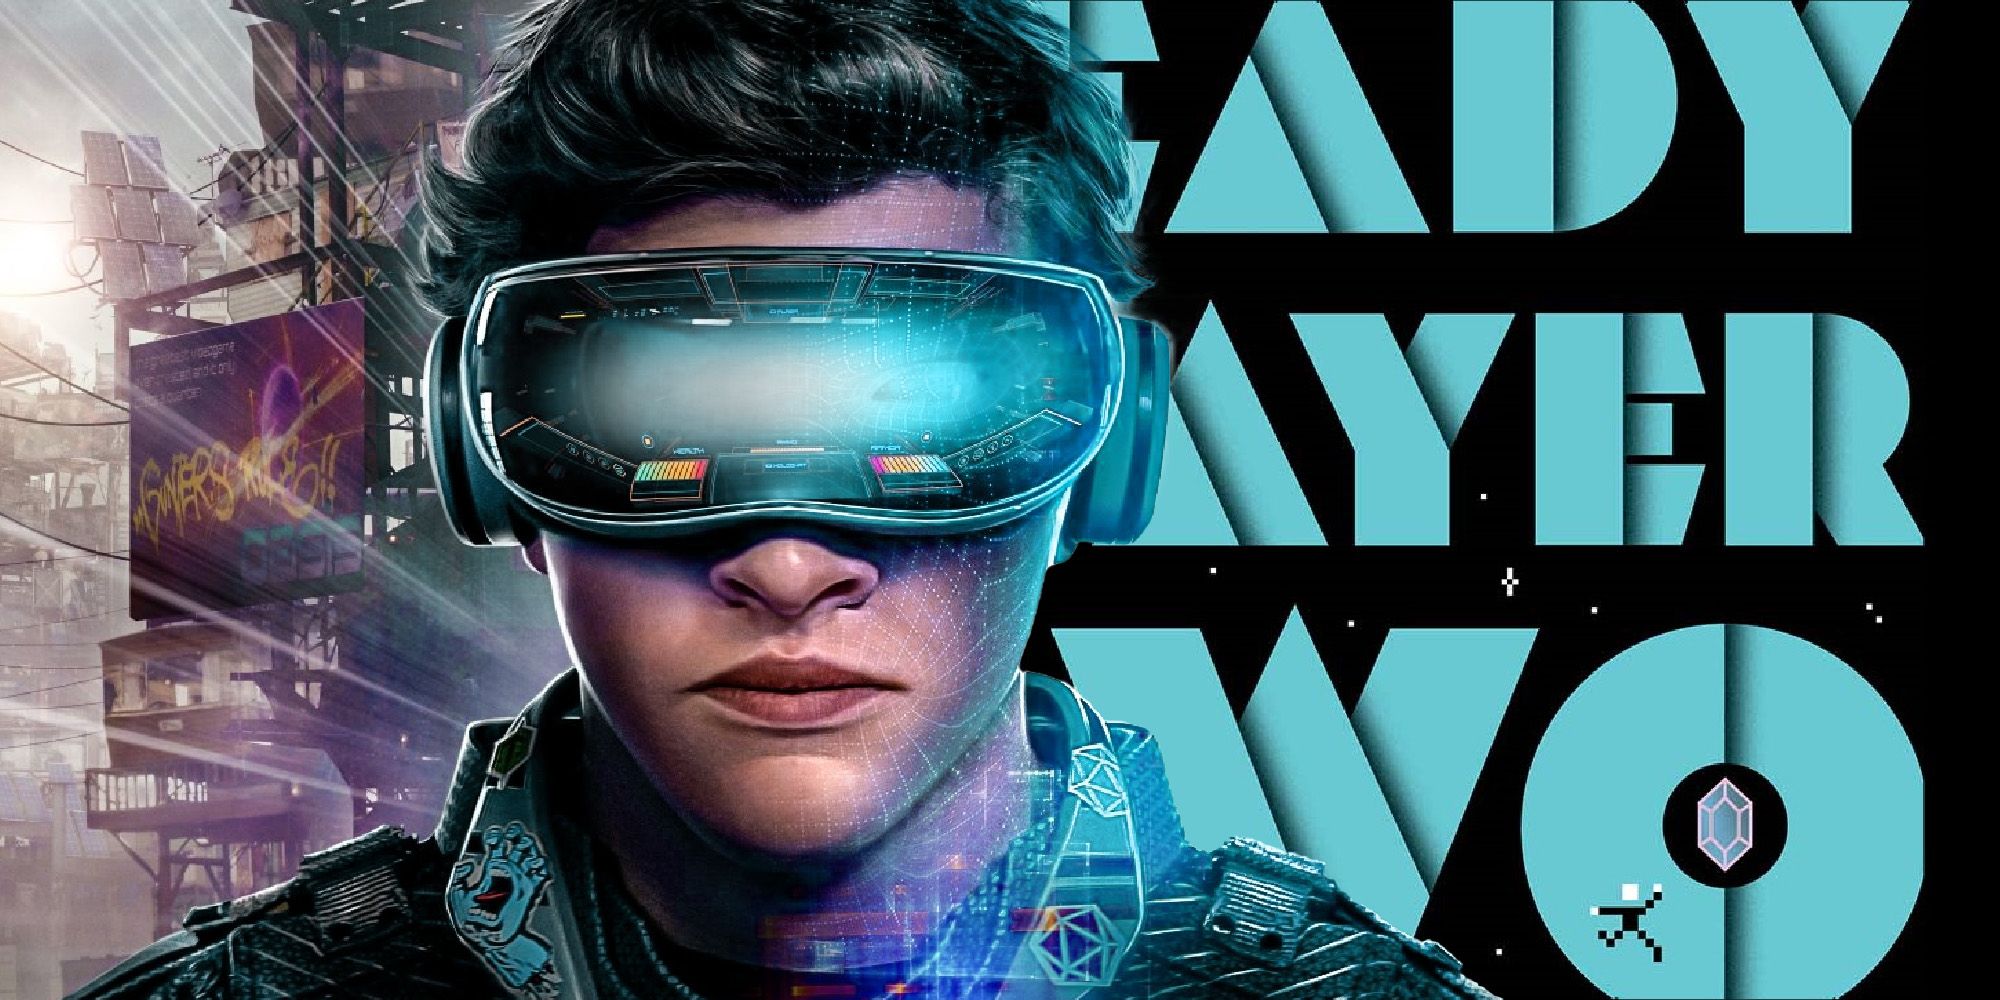 A drawing of a young man wearing a VR headset and a graphic for Ready Player Two